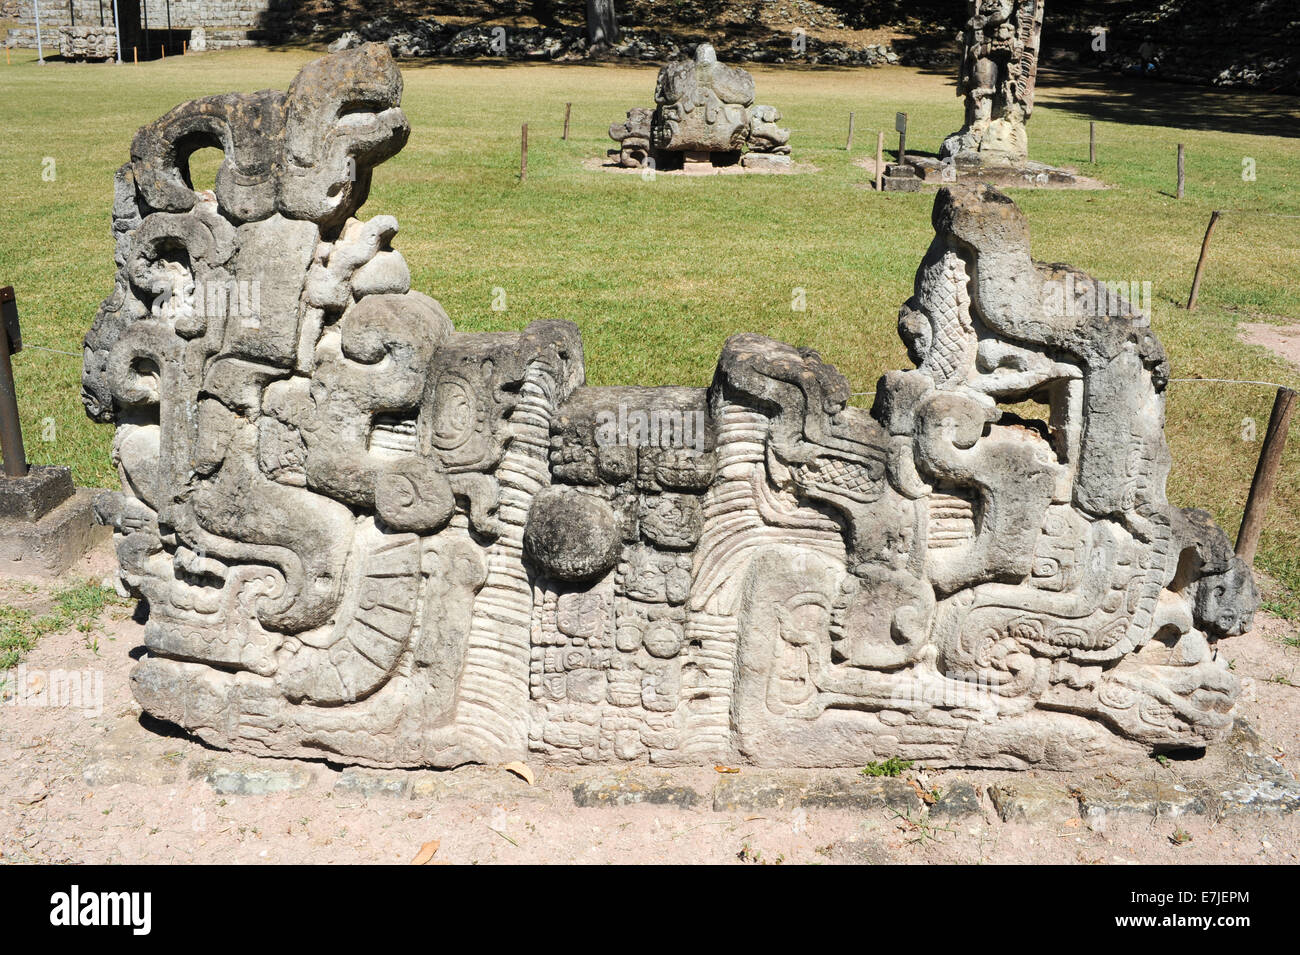 altar, Central America, Americas, ancient, archaeology, architecture, building, built, carved, copan, culture, exterior, gods, g Stock Photo